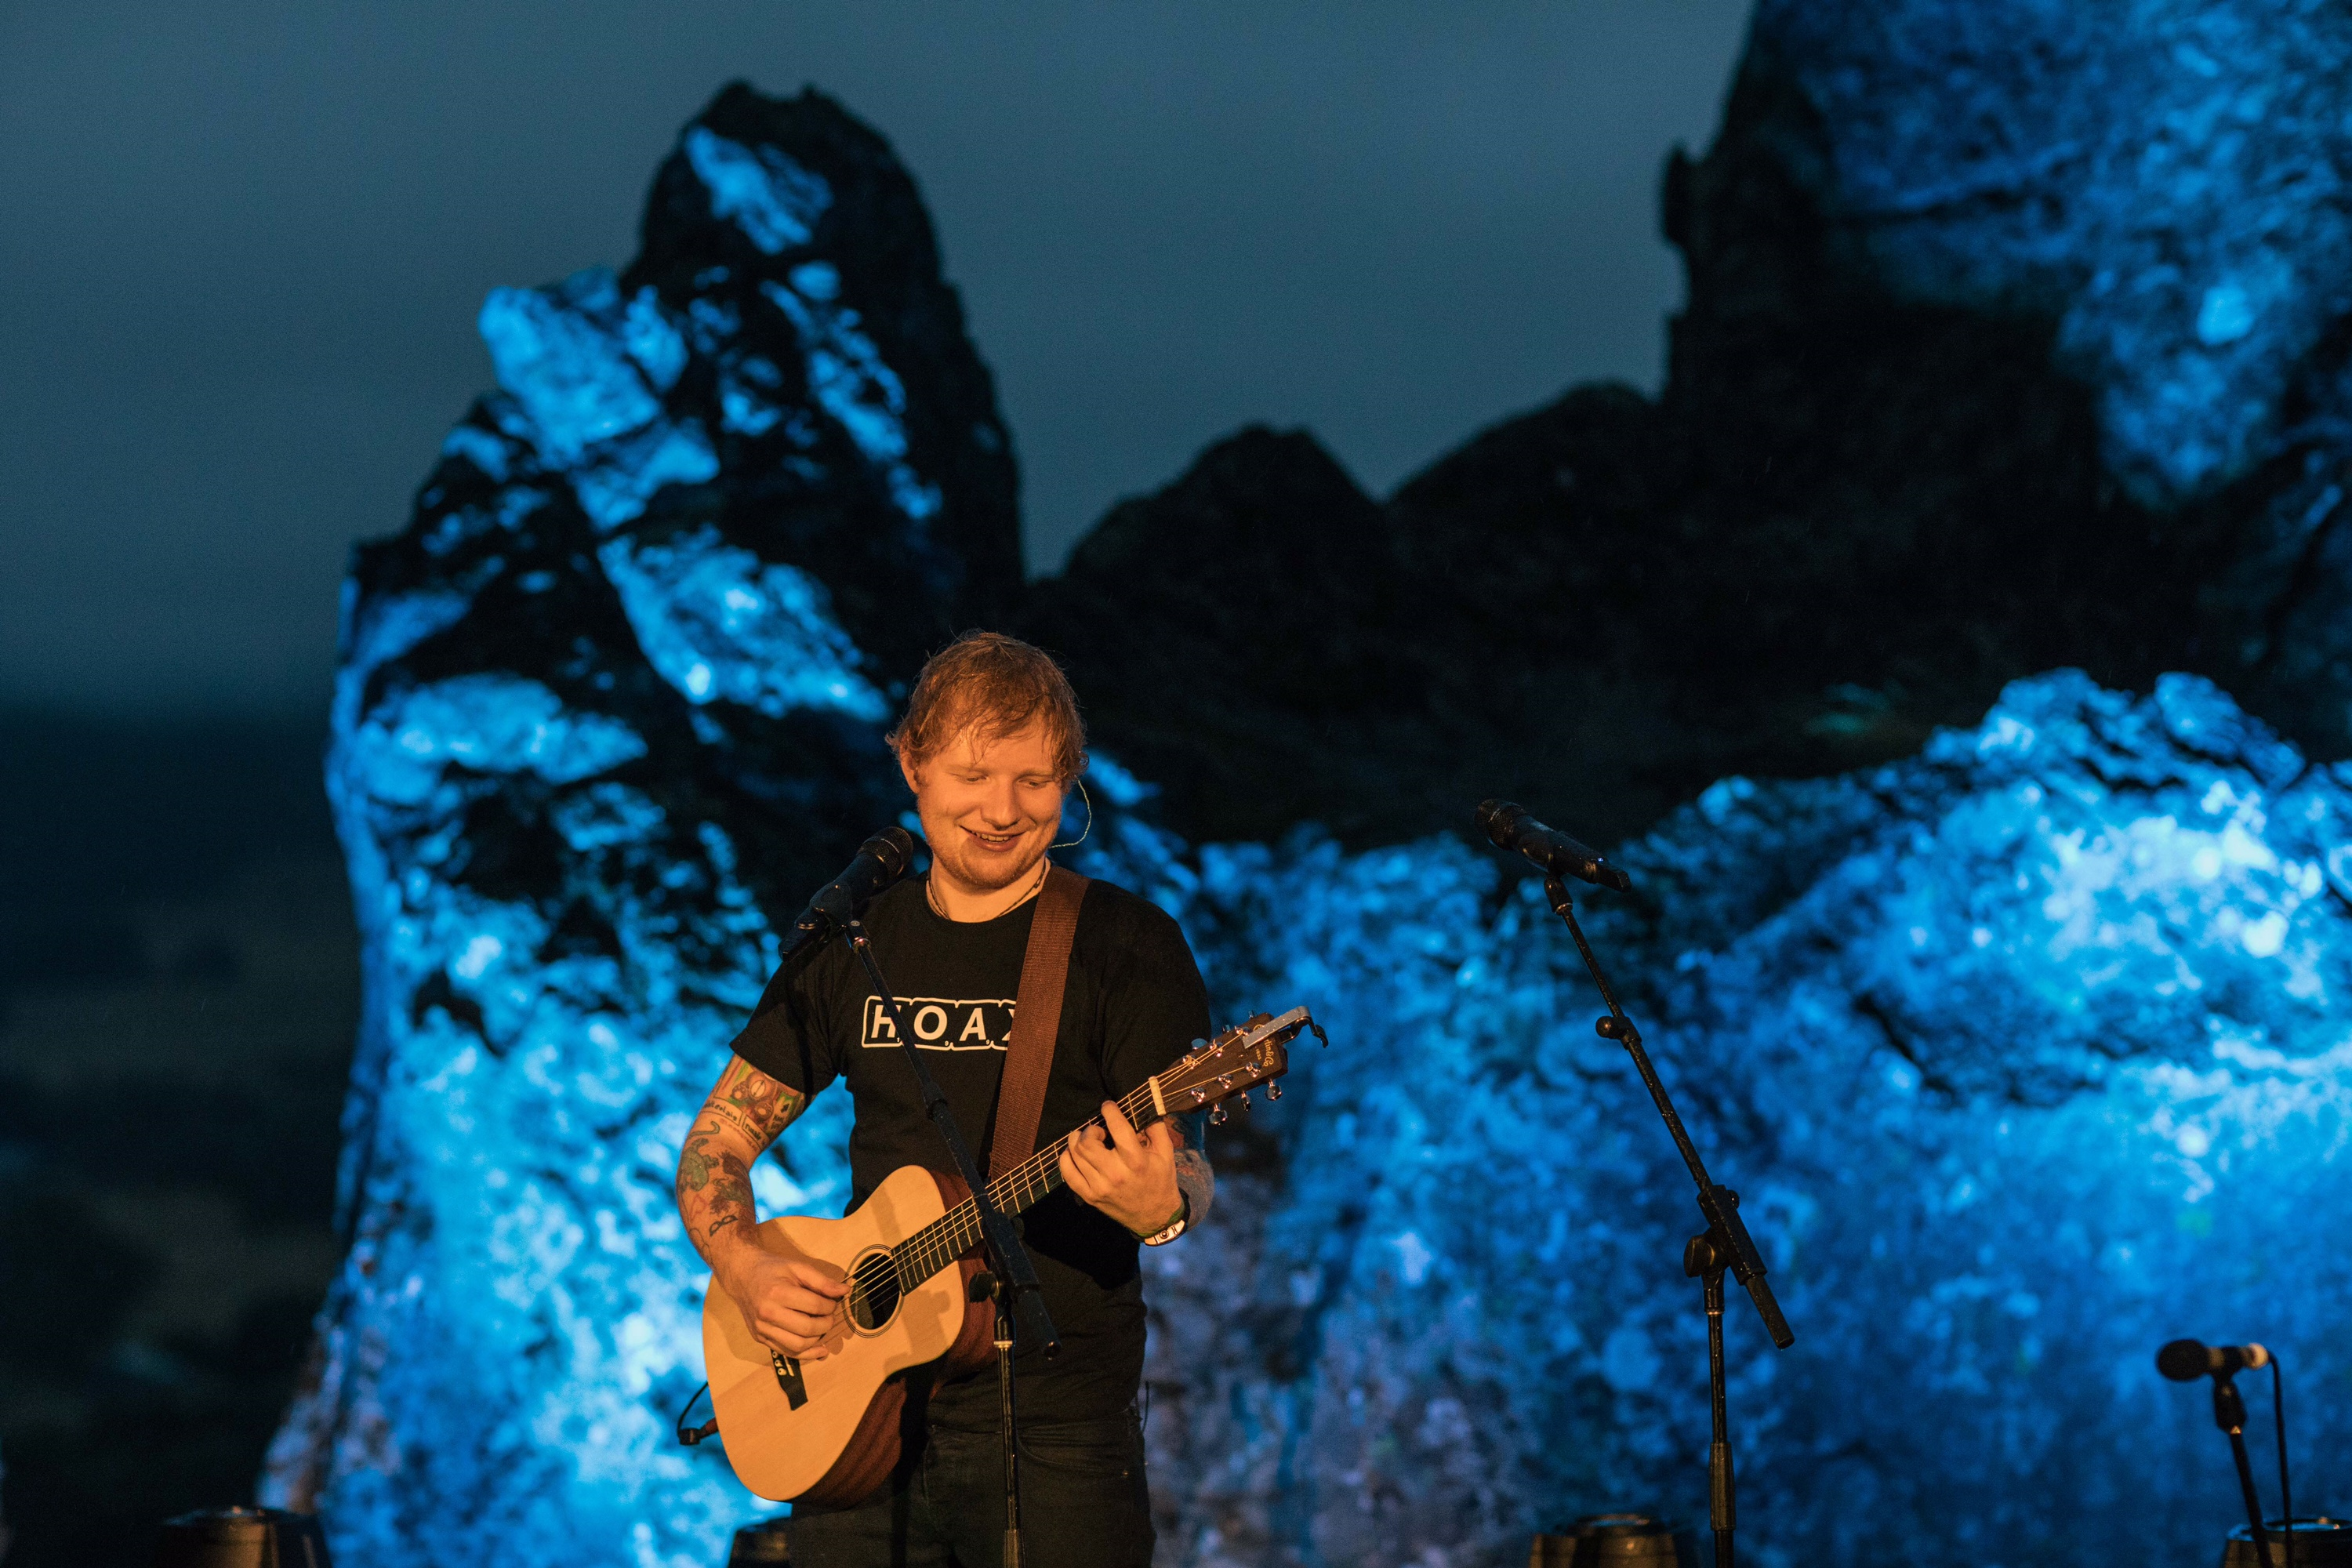 More NZ shows for Ed Sheeran?